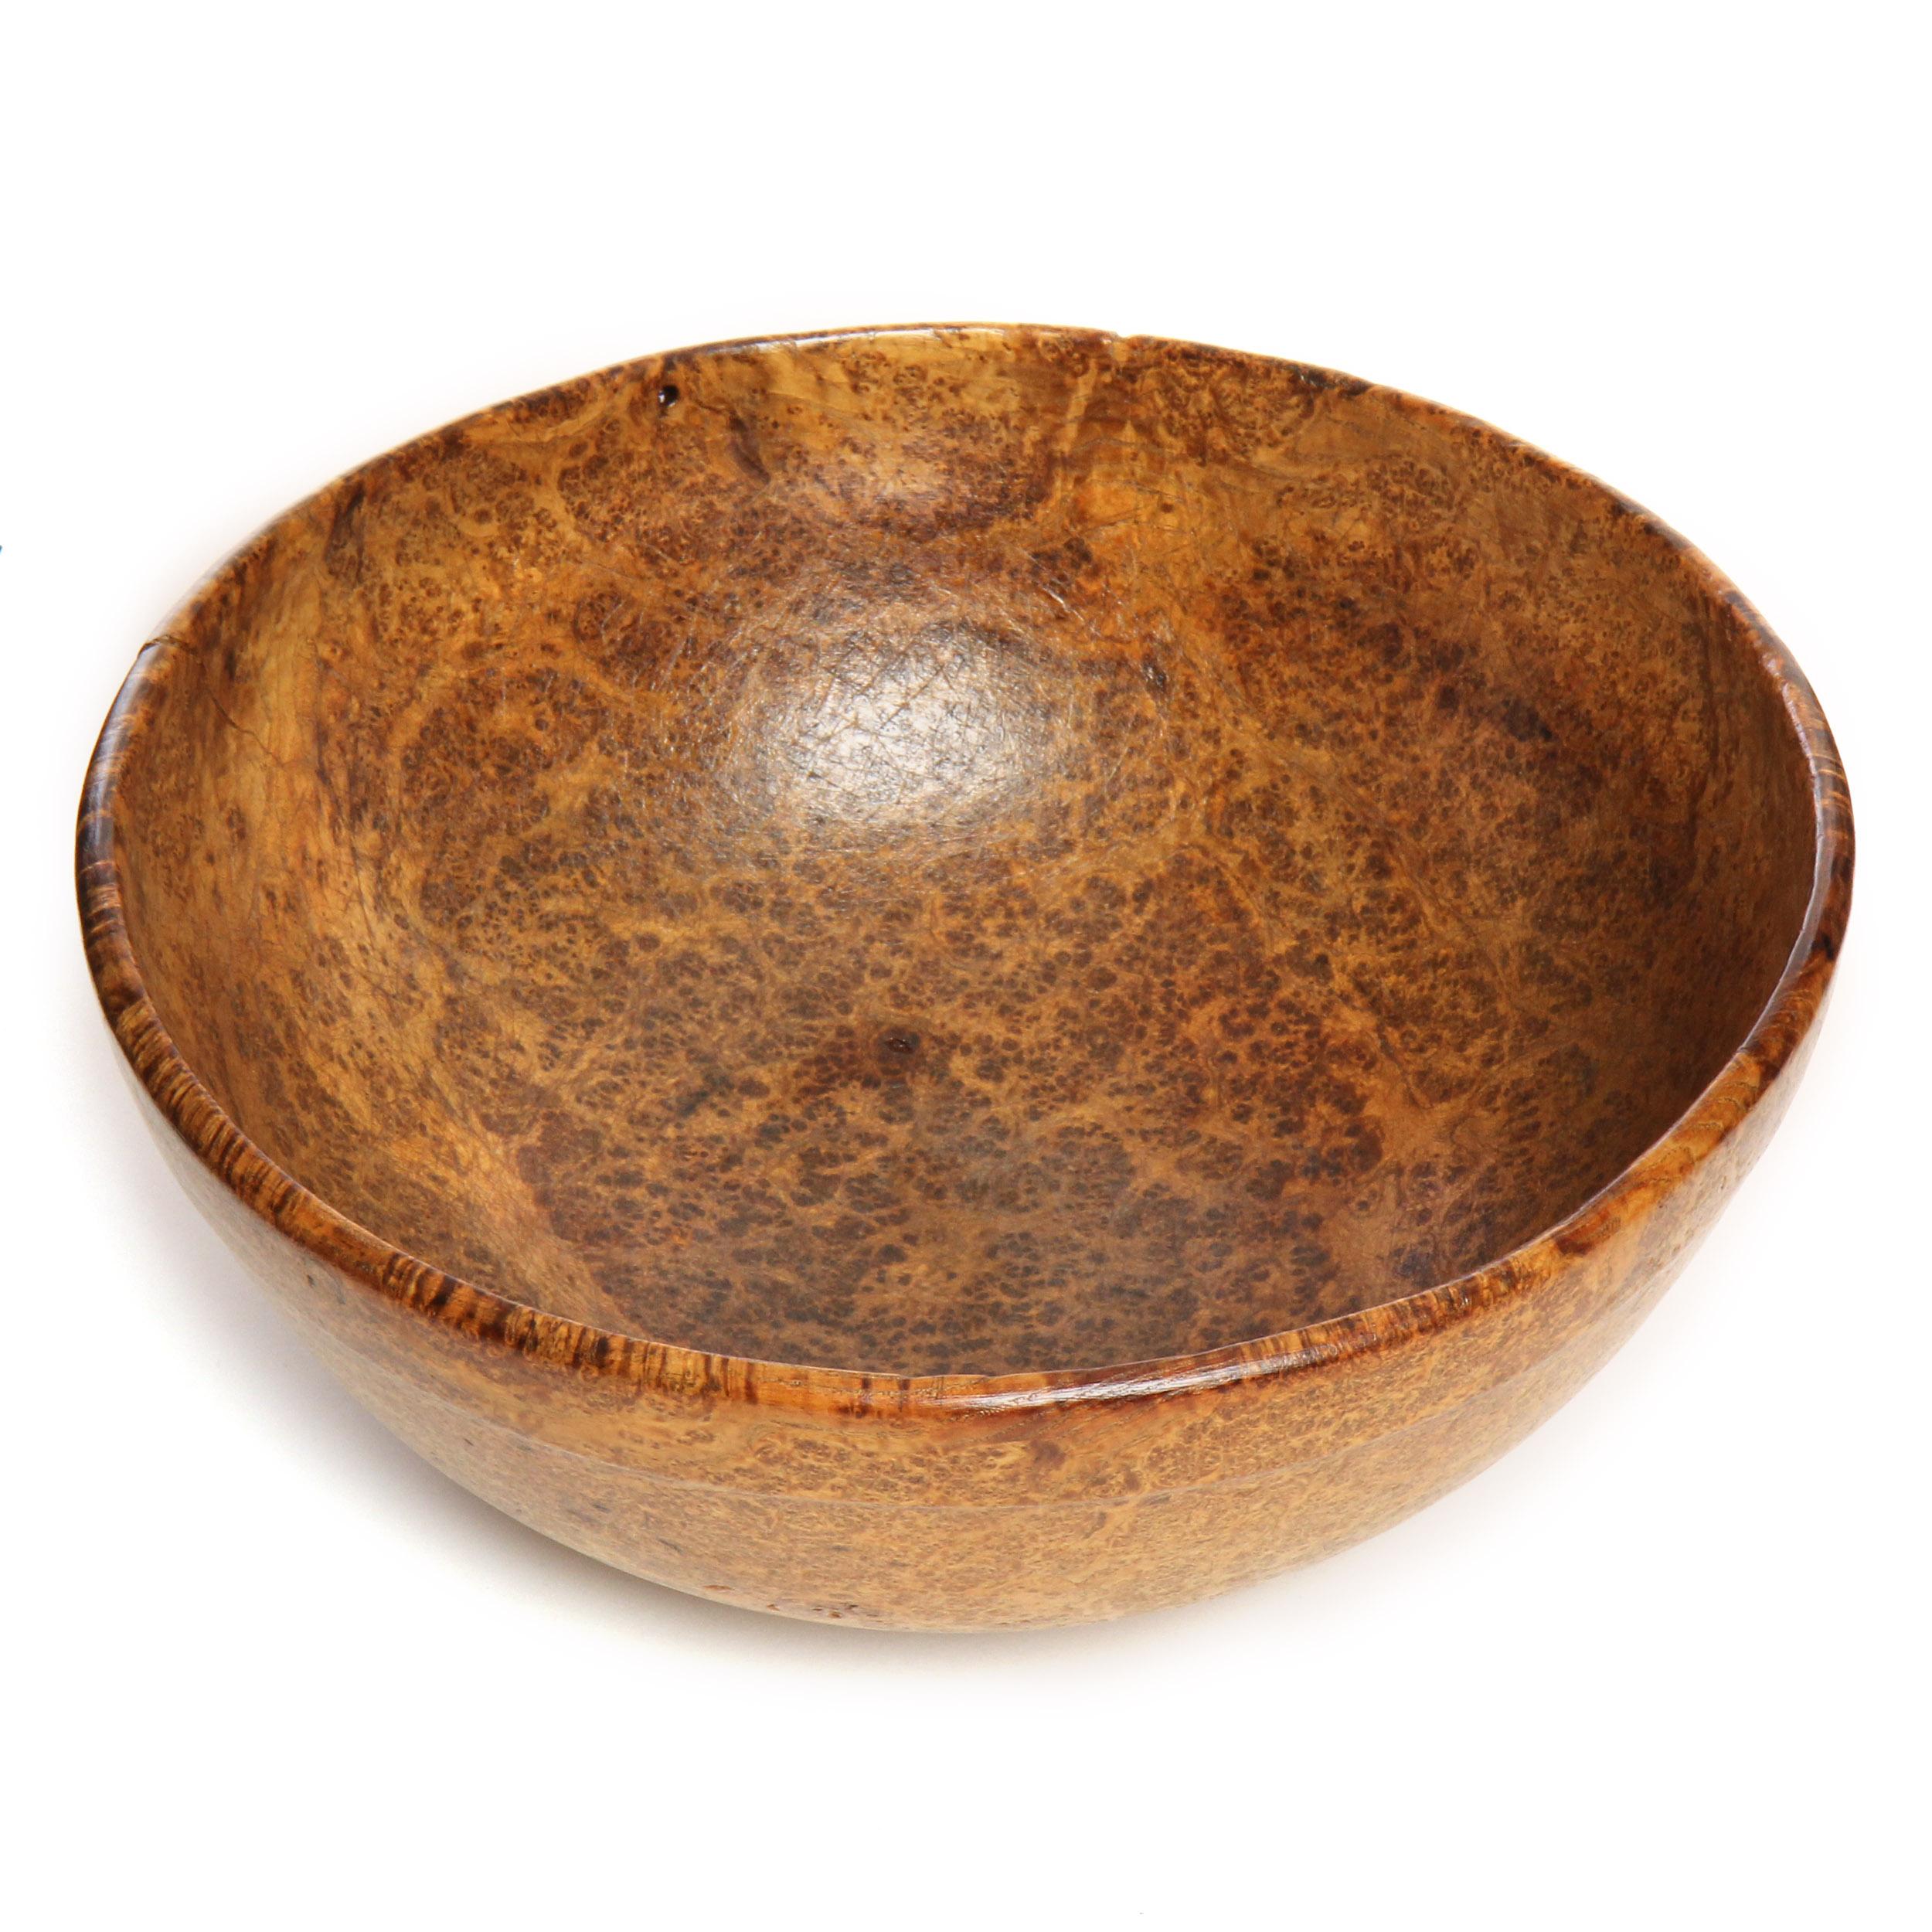 A well scaled bowl carved from a single piece of burled maple.